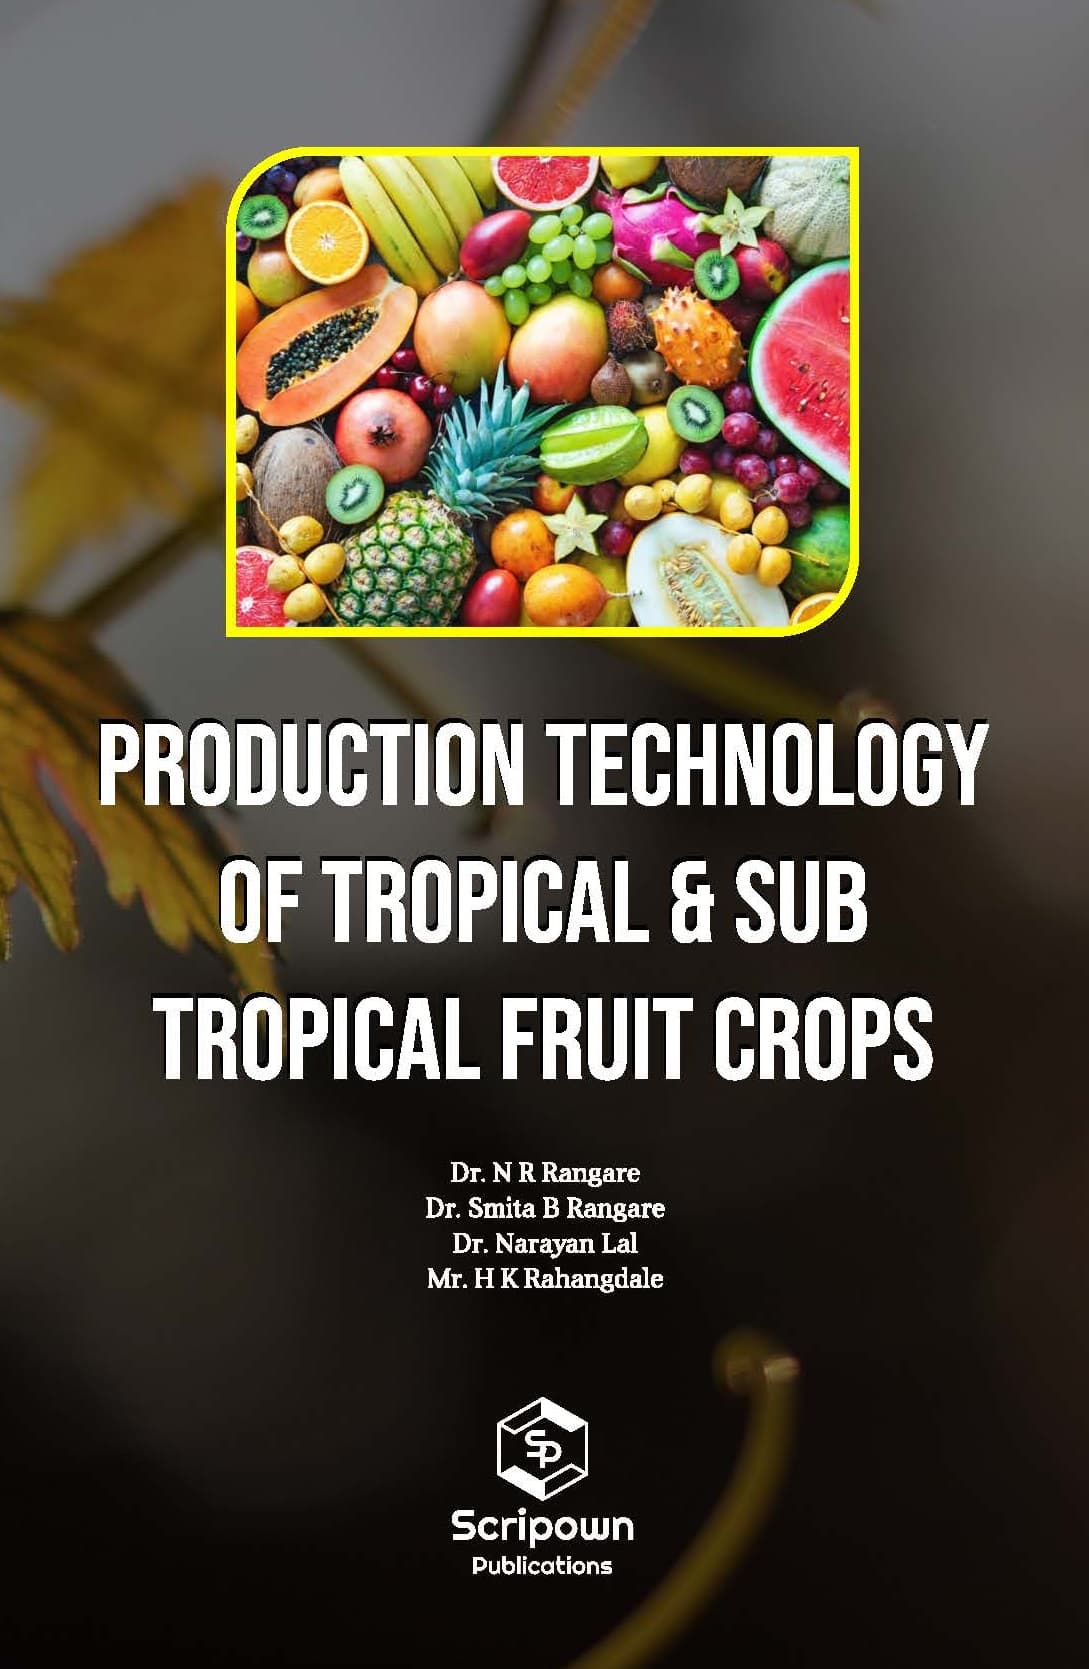 Production Technology of Tropical & Sub Tropical Fruit Crops